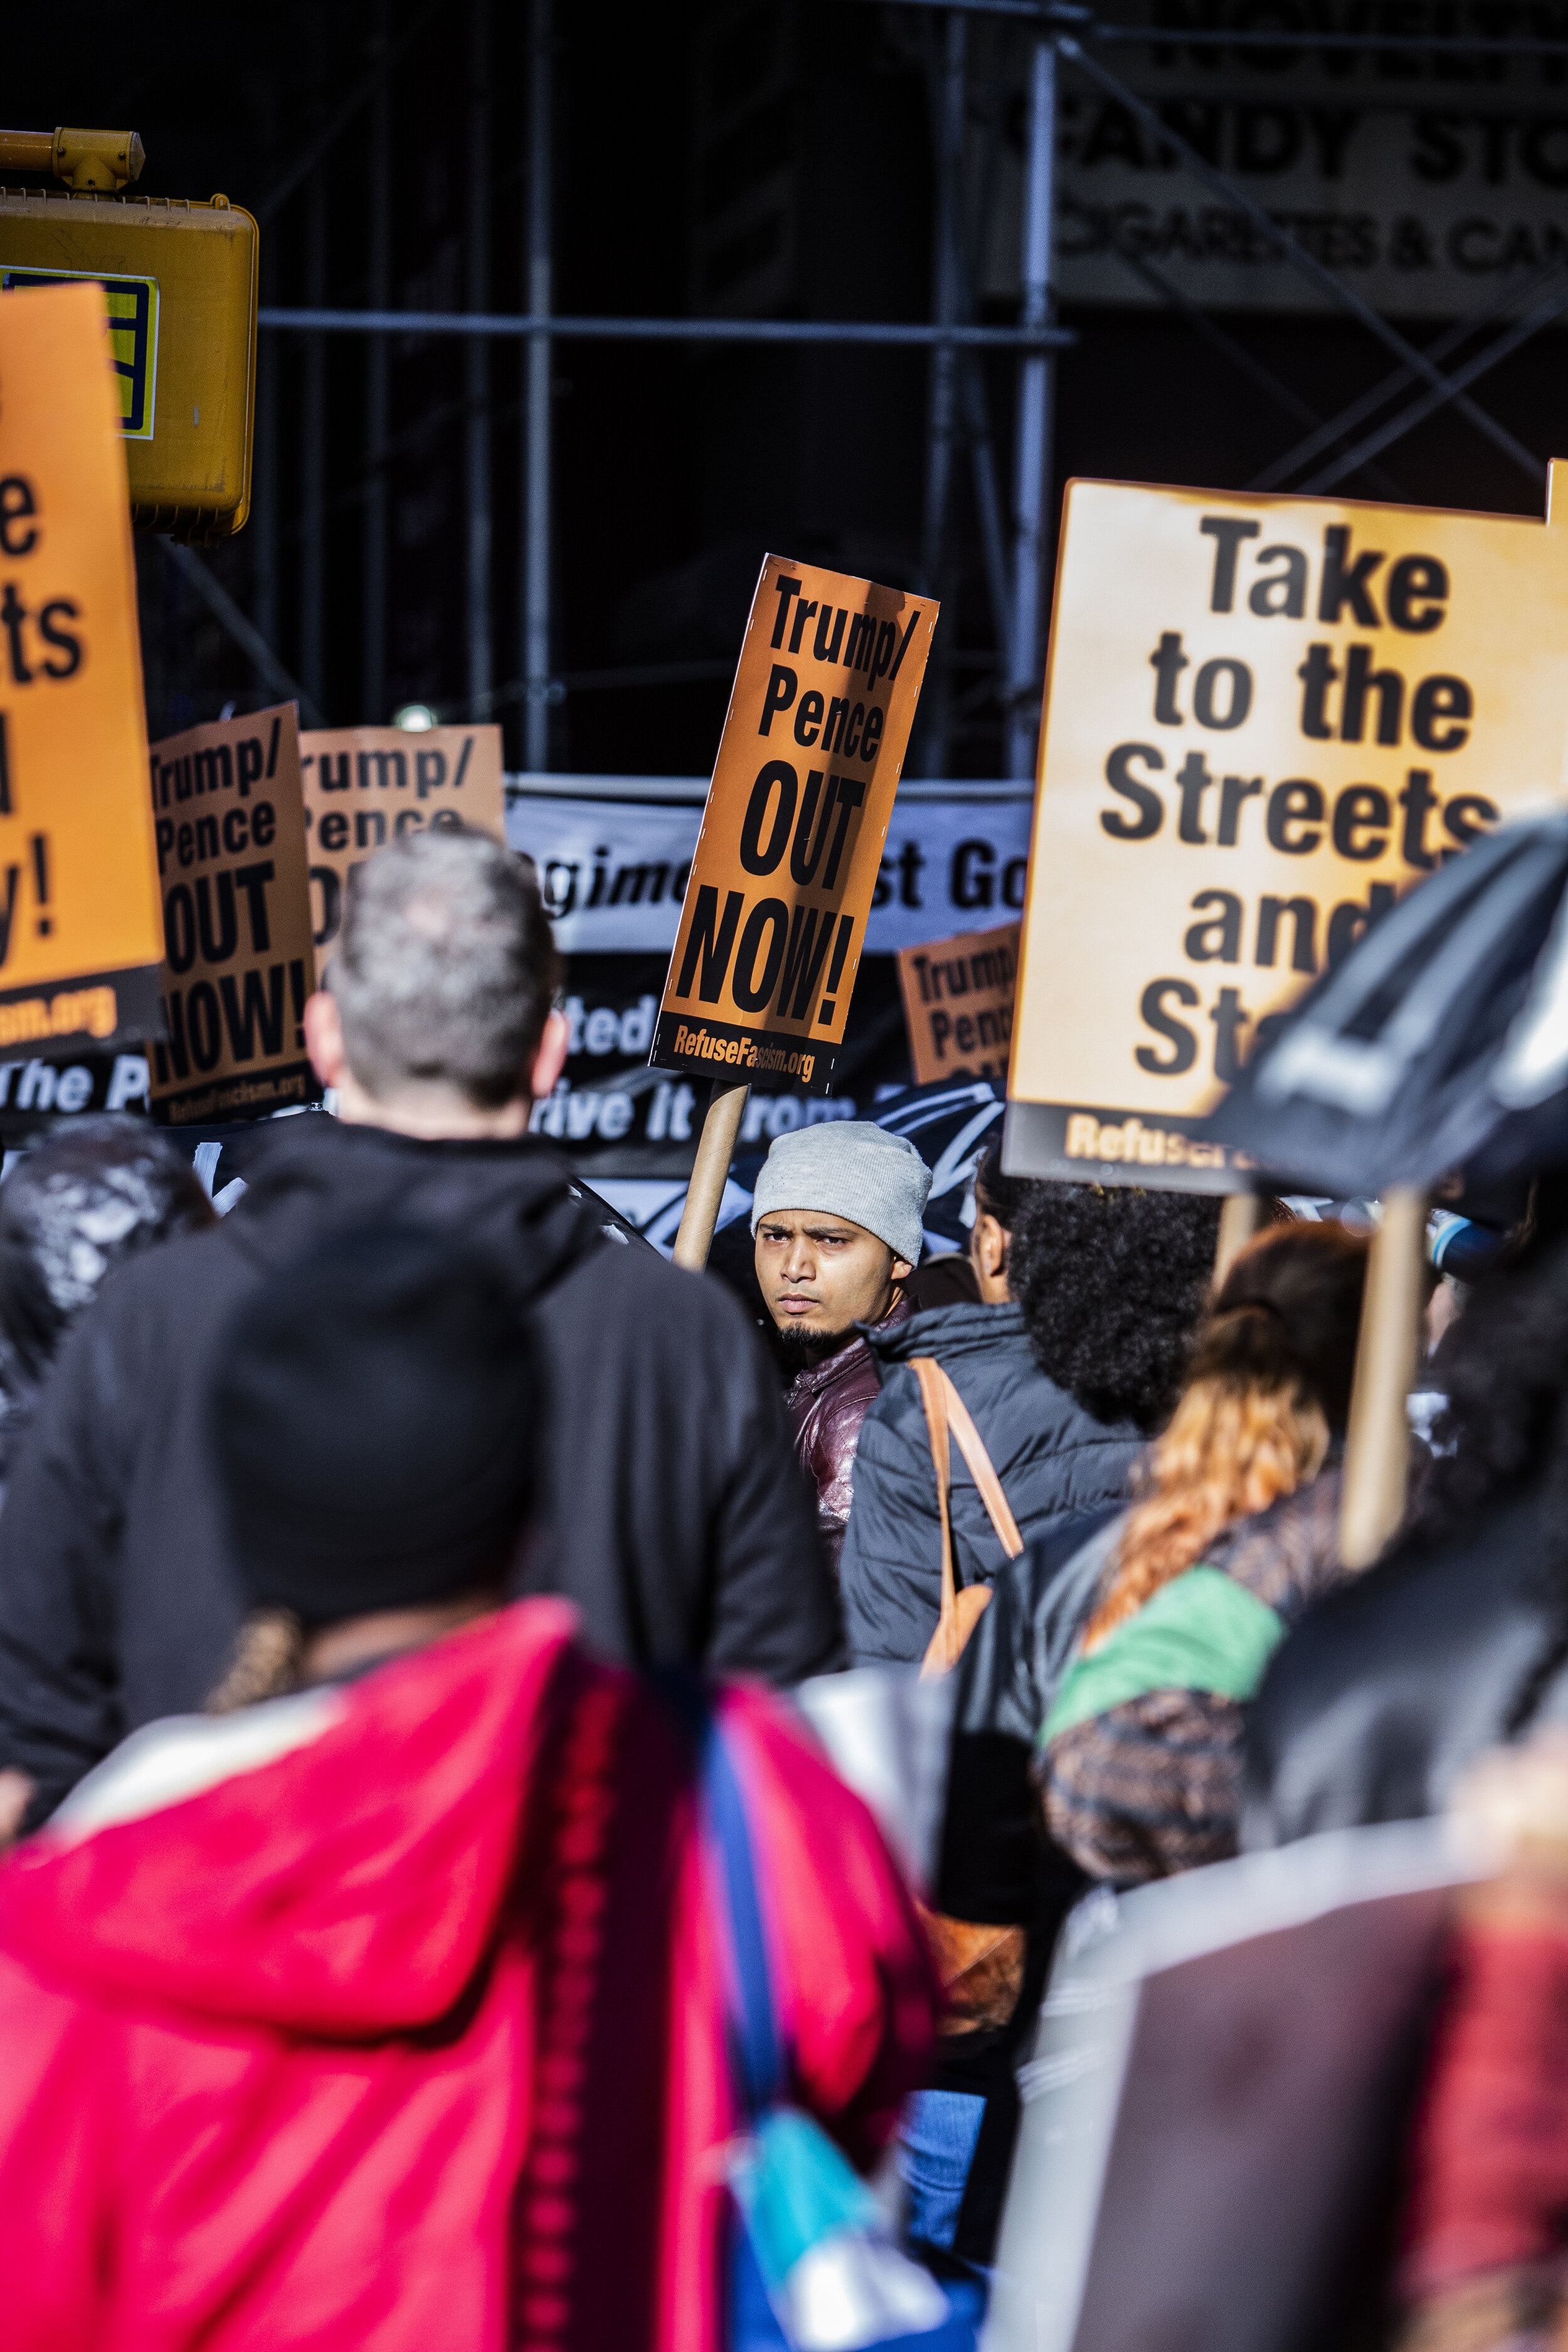 OUTNOW_Protest_2019_NYC-1050.jpg